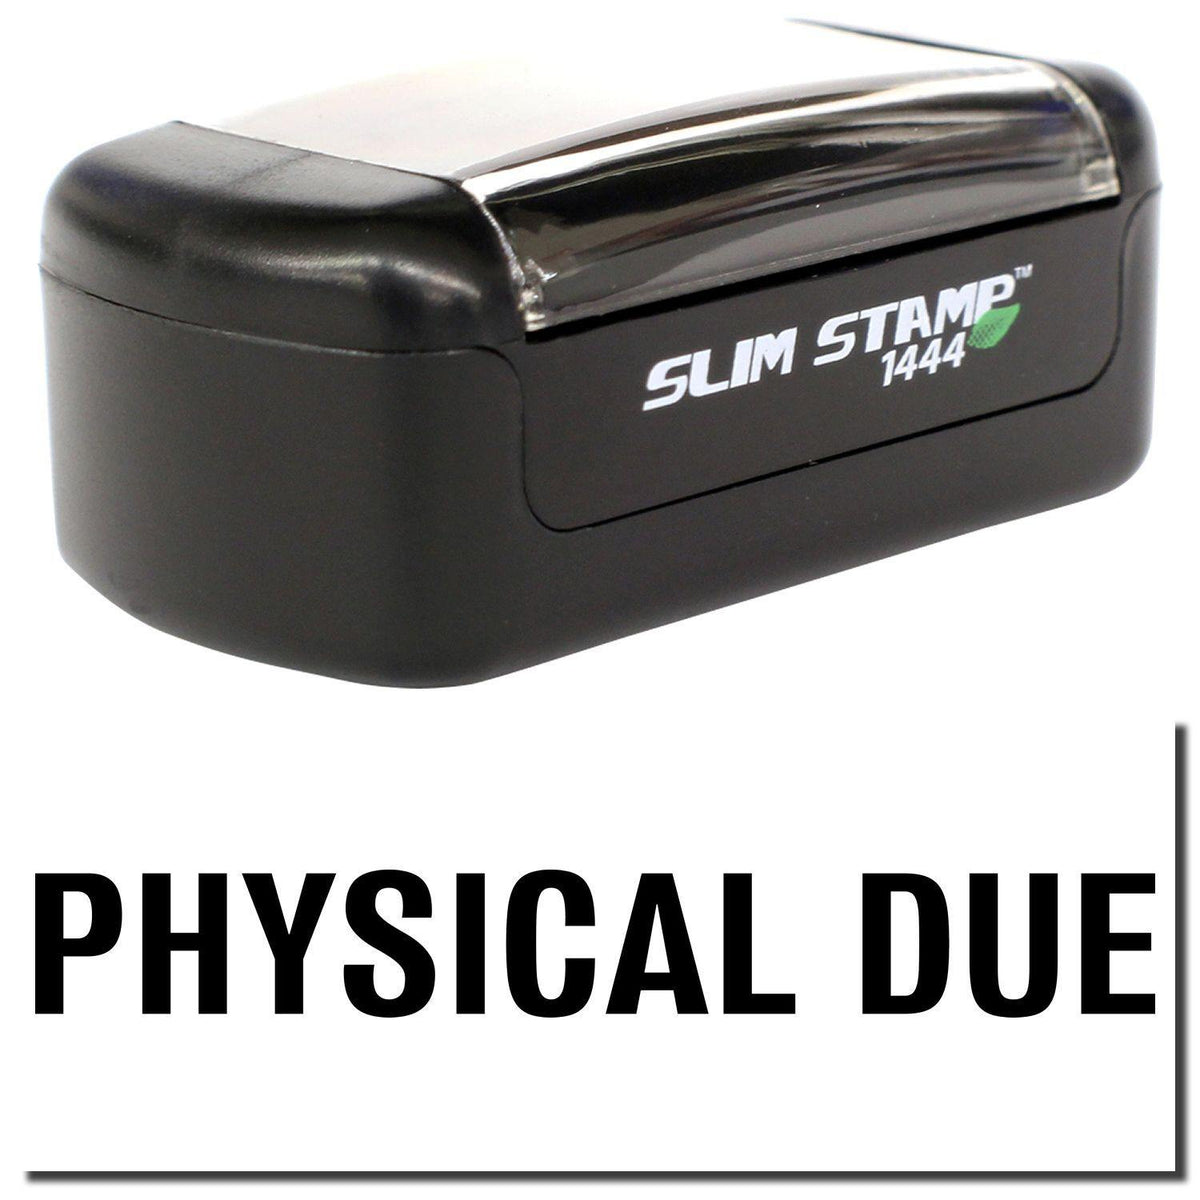 A stock office pre-inked stamp with a stamped image showing how the text &quot;PHYSICAL DUE&quot; in bold font is displayed after stamping.